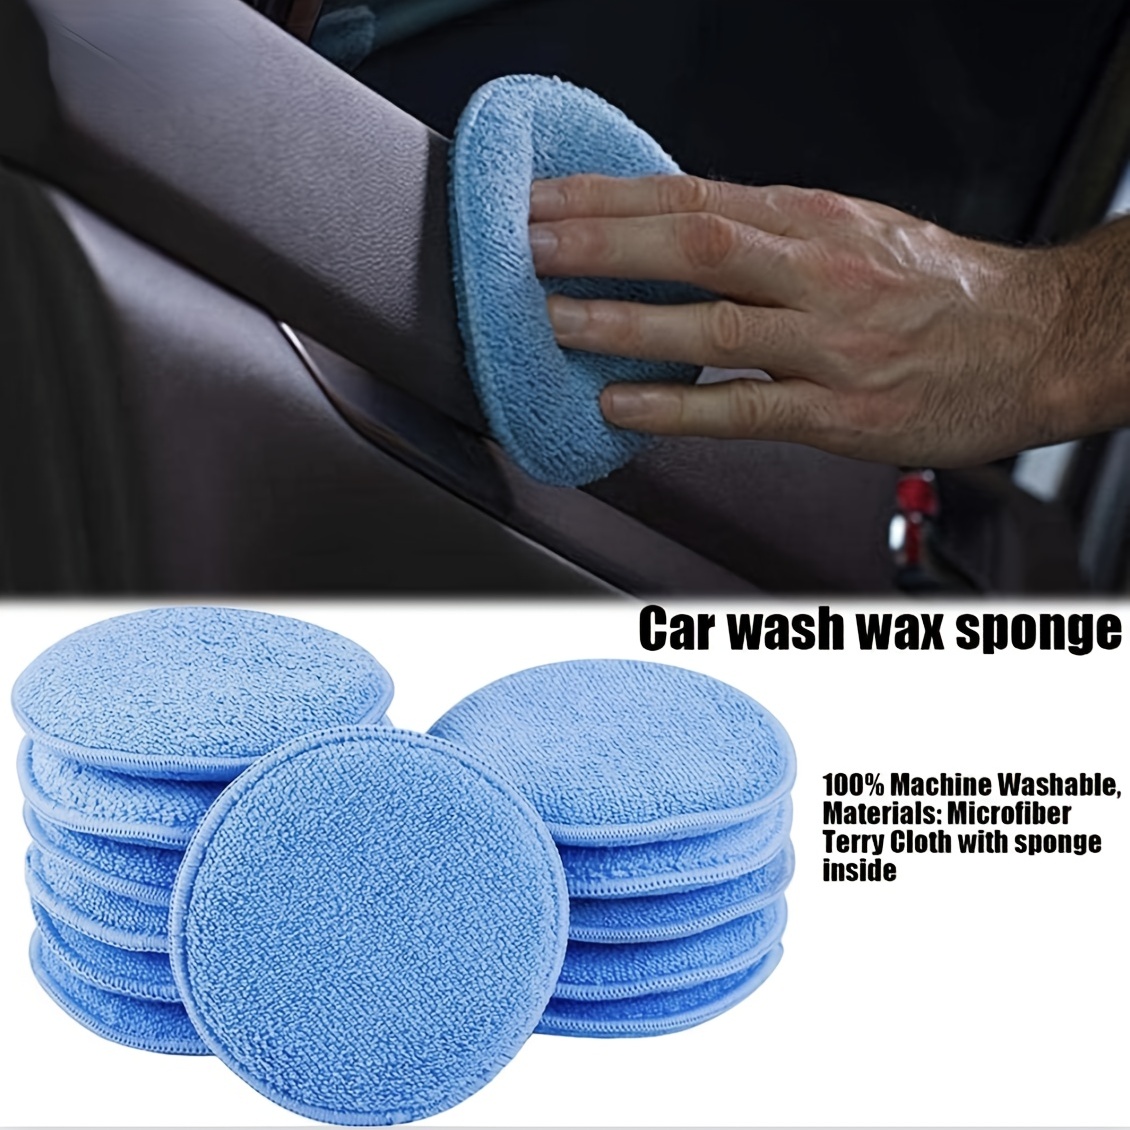 Hand Wax Application For Extra Clean & Shiny Finish - Call (954